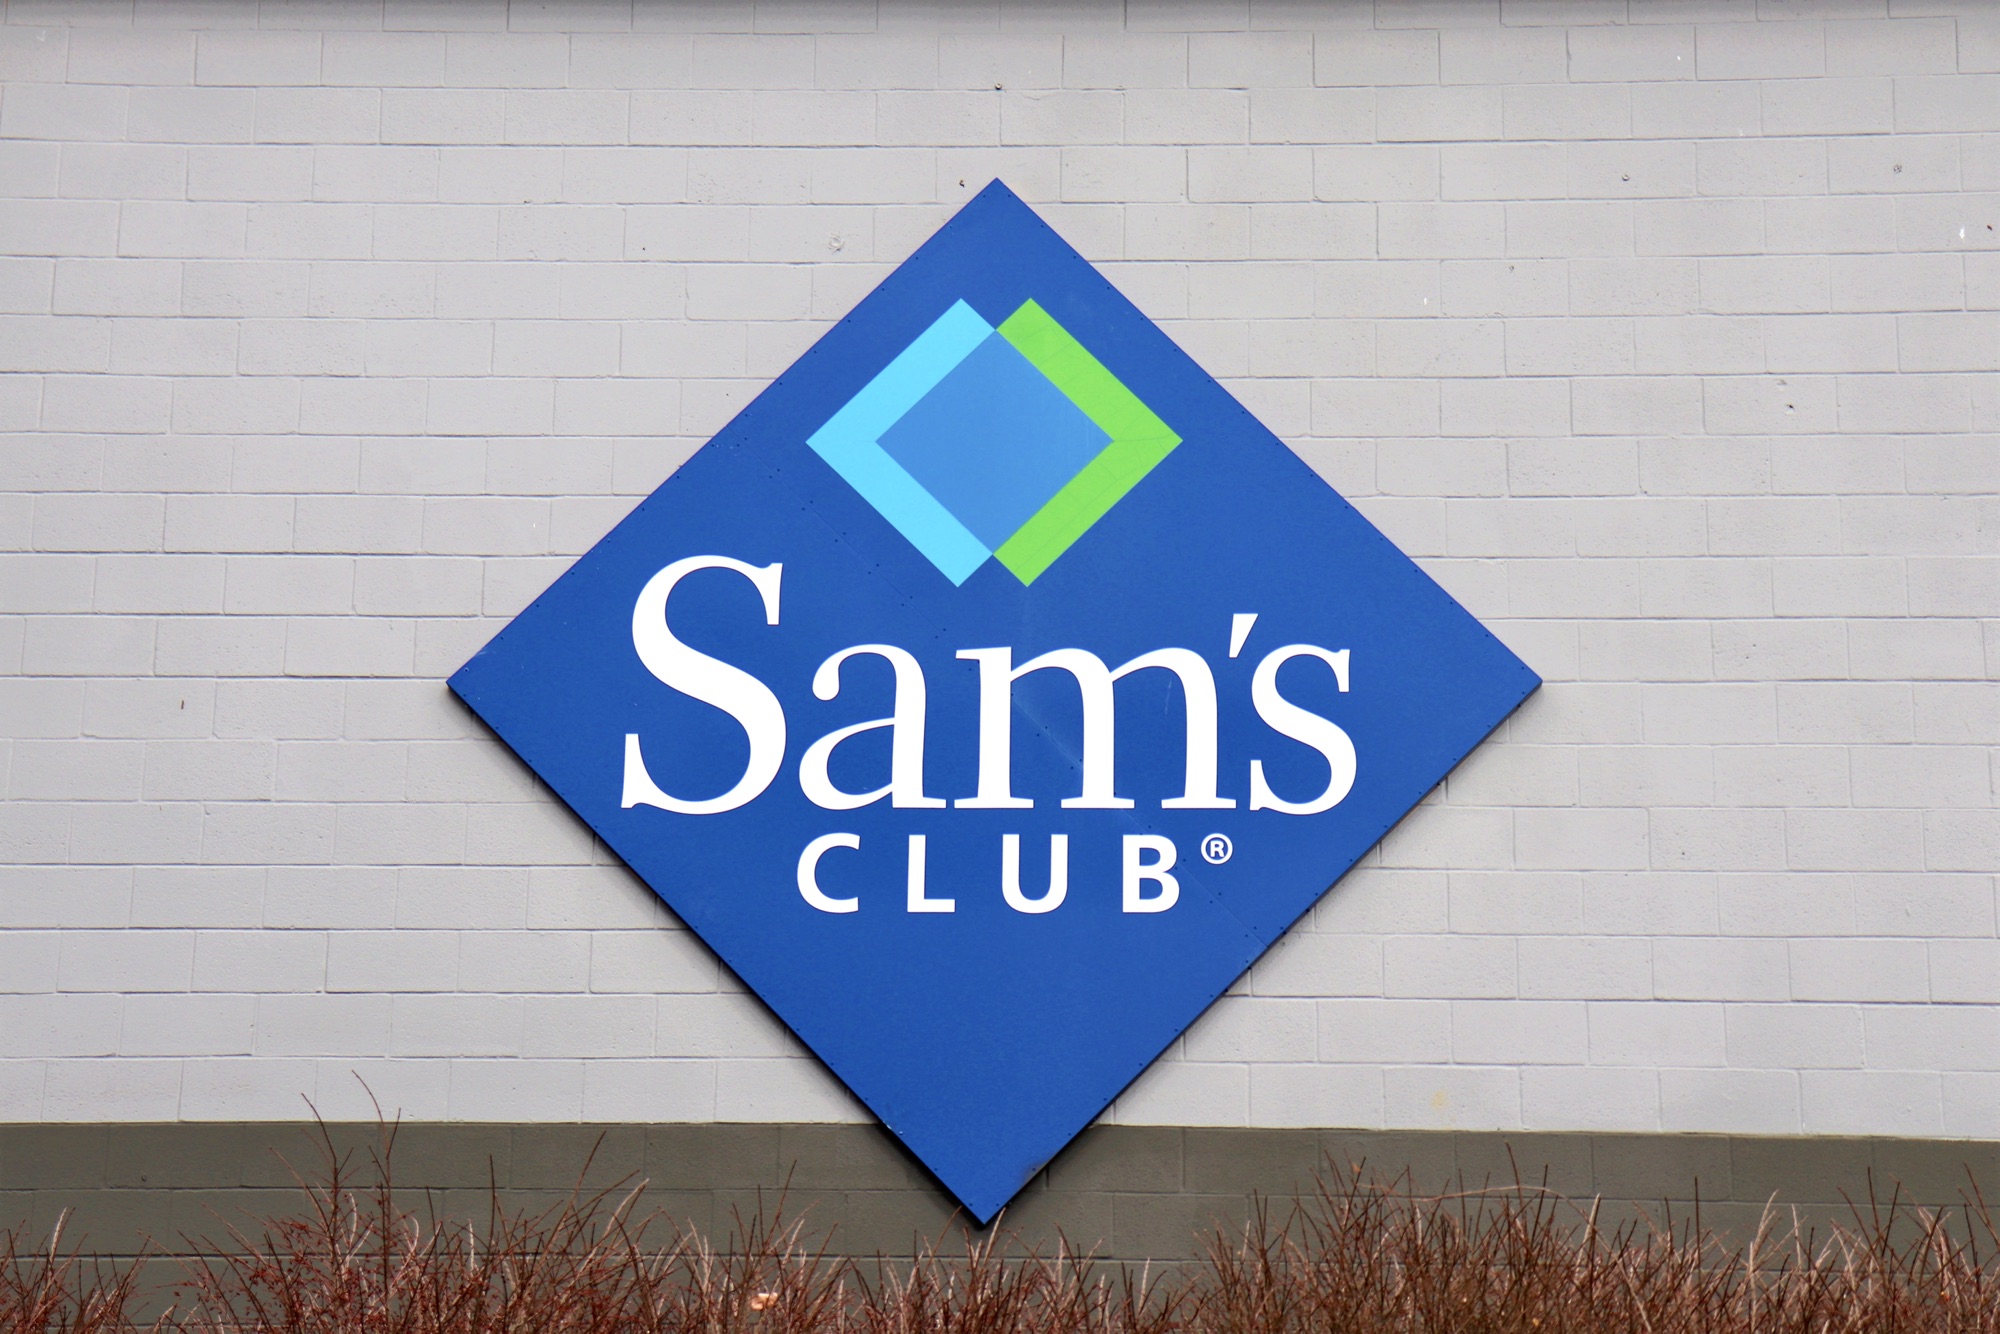 14 Items You Should Always Buy at Sam’s Club